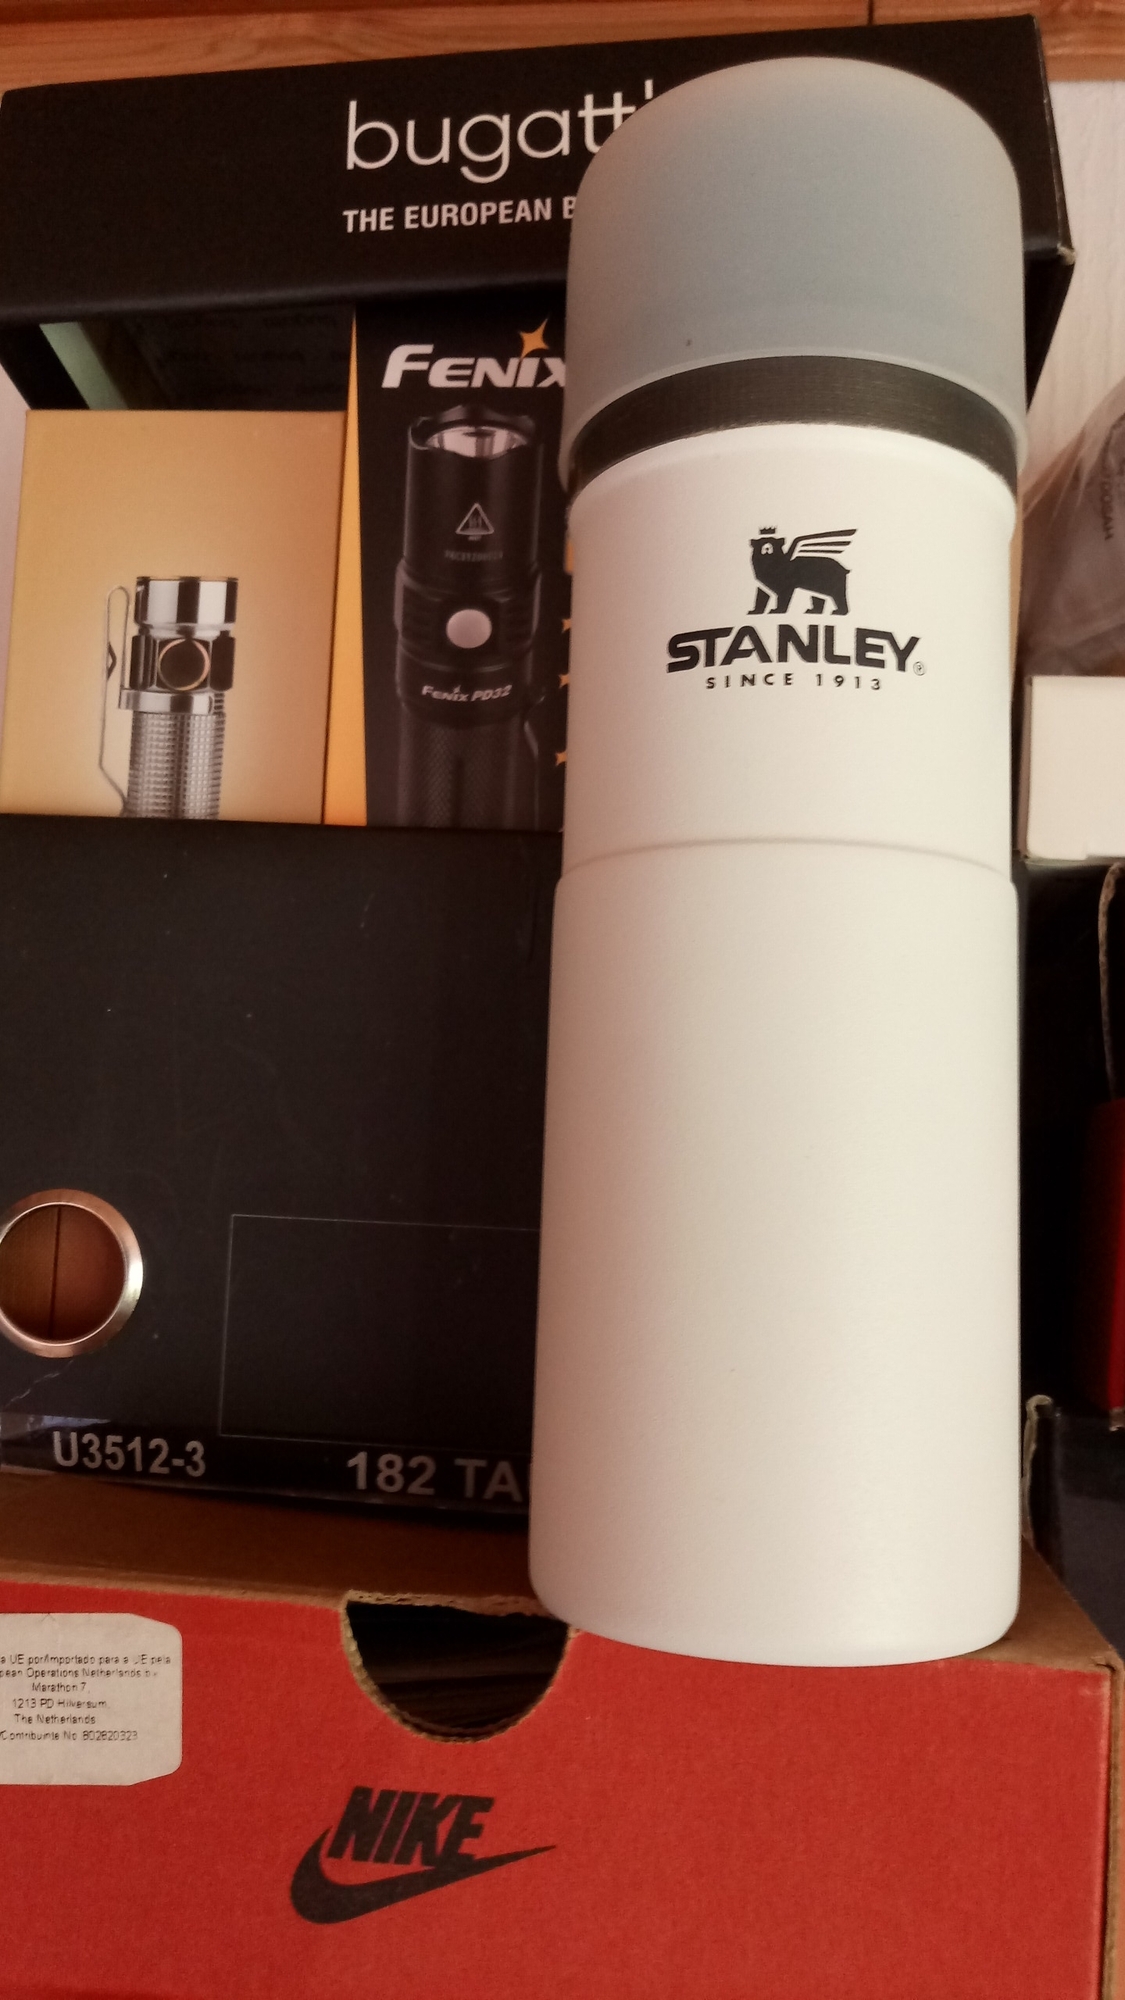 Vintage Stanley Aladdin Steel Thermos - general for sale - by